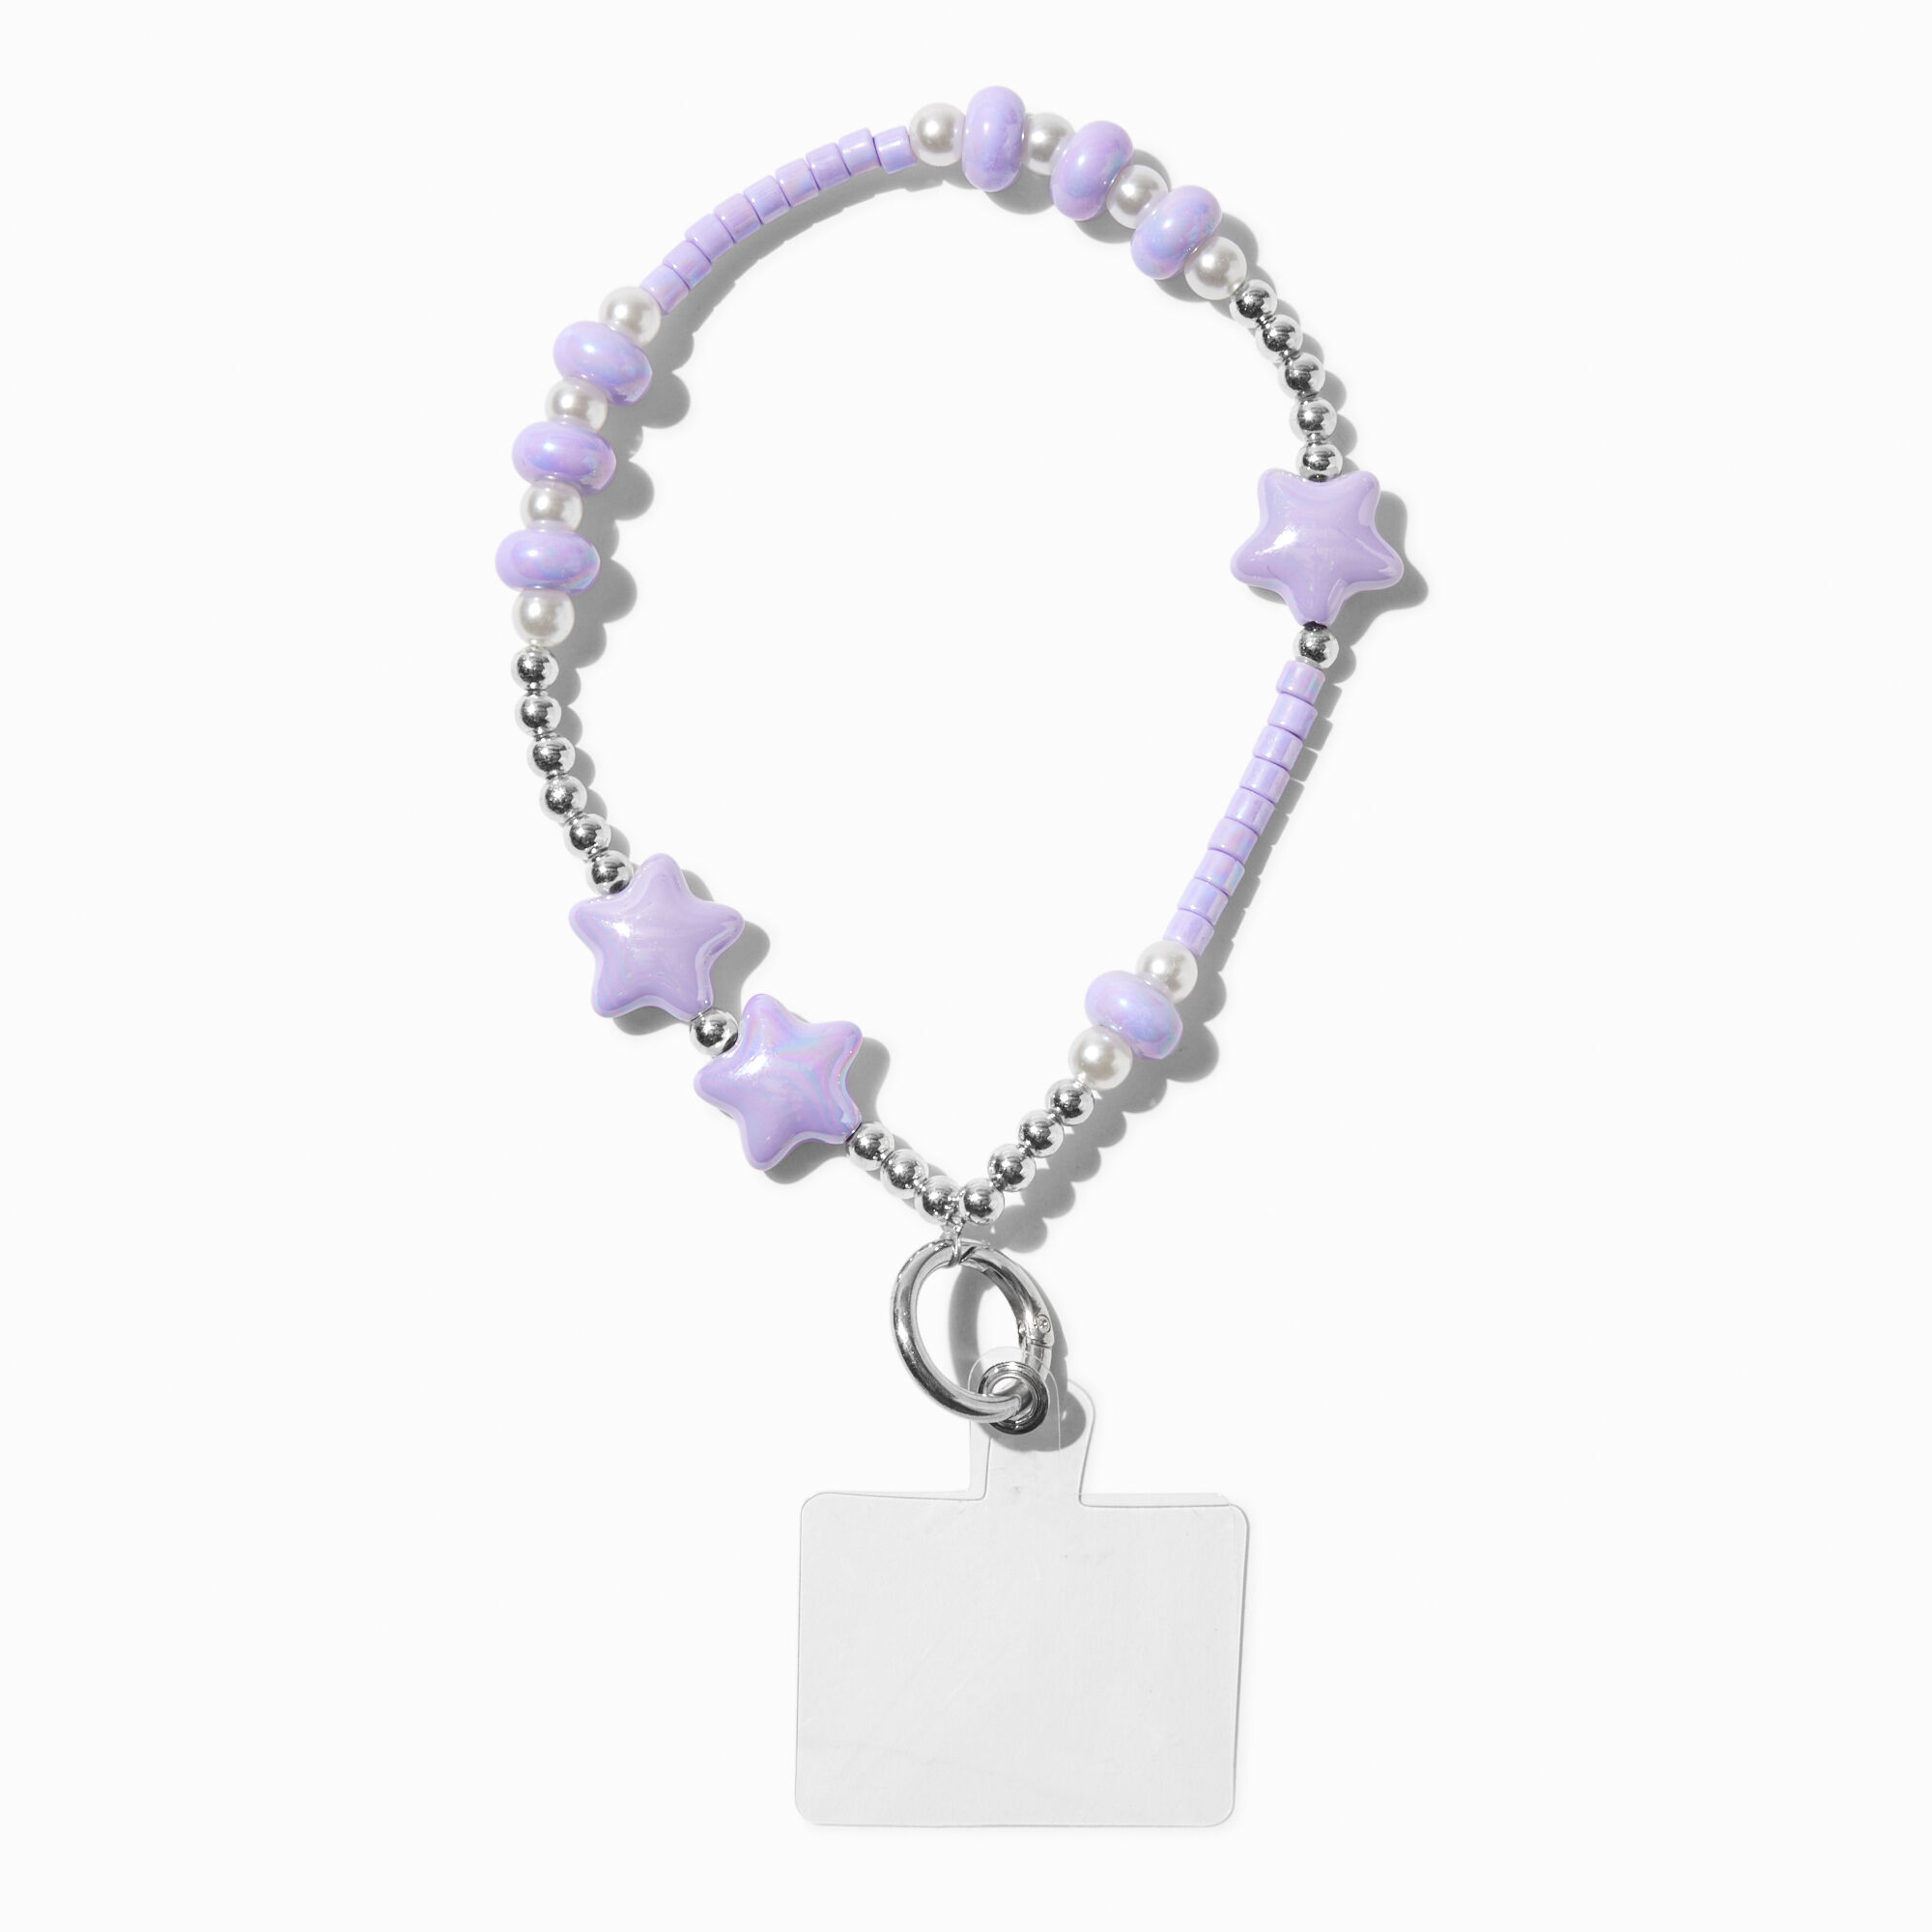 View Claires Star Beaded Phone Wrist Strap Purple information